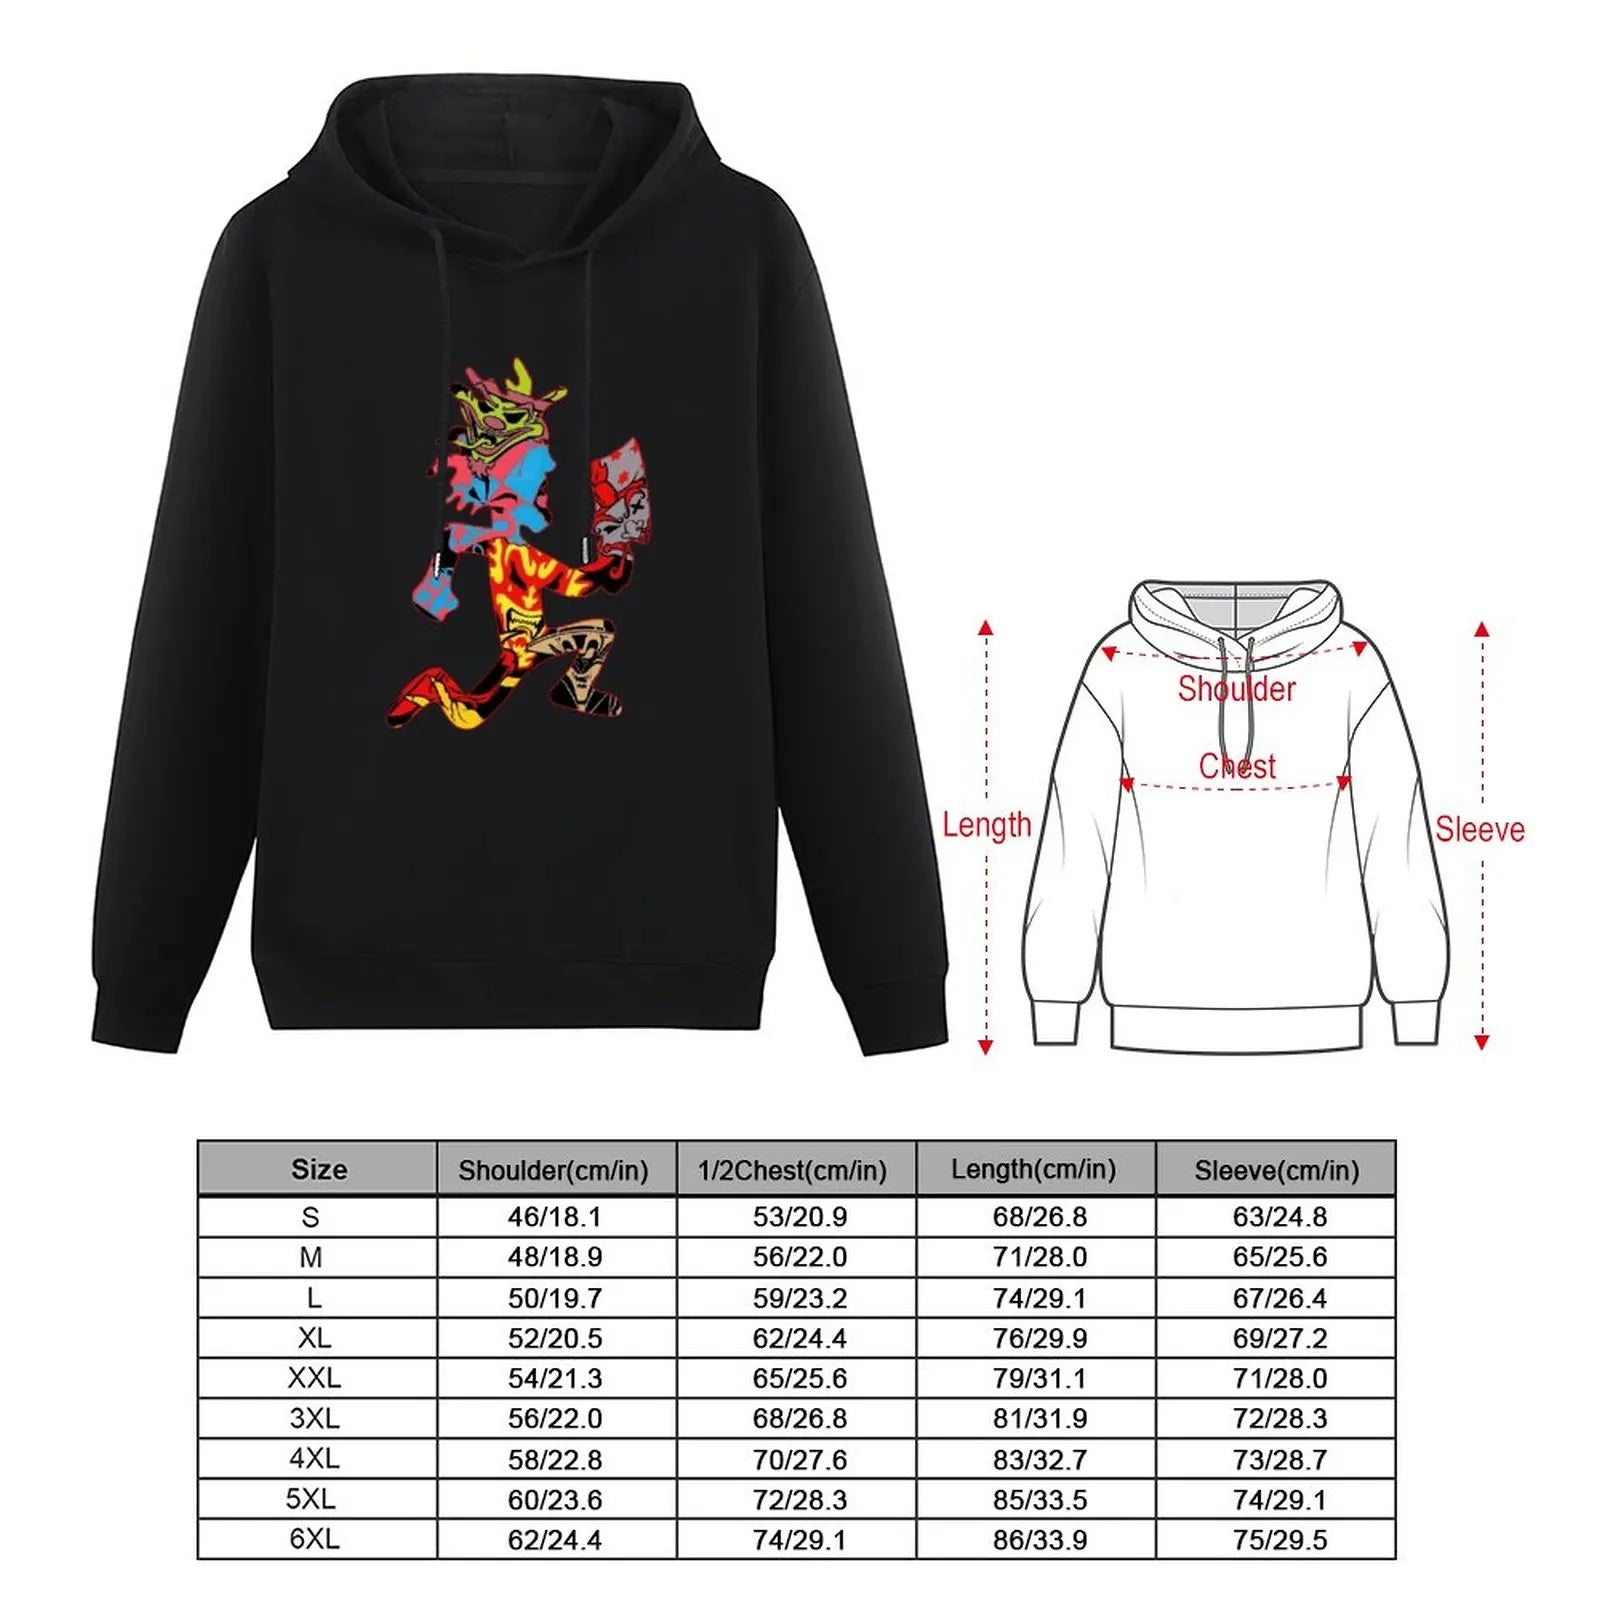 New ICP Hatchetman Pullover Hoodie - The Rave Cave